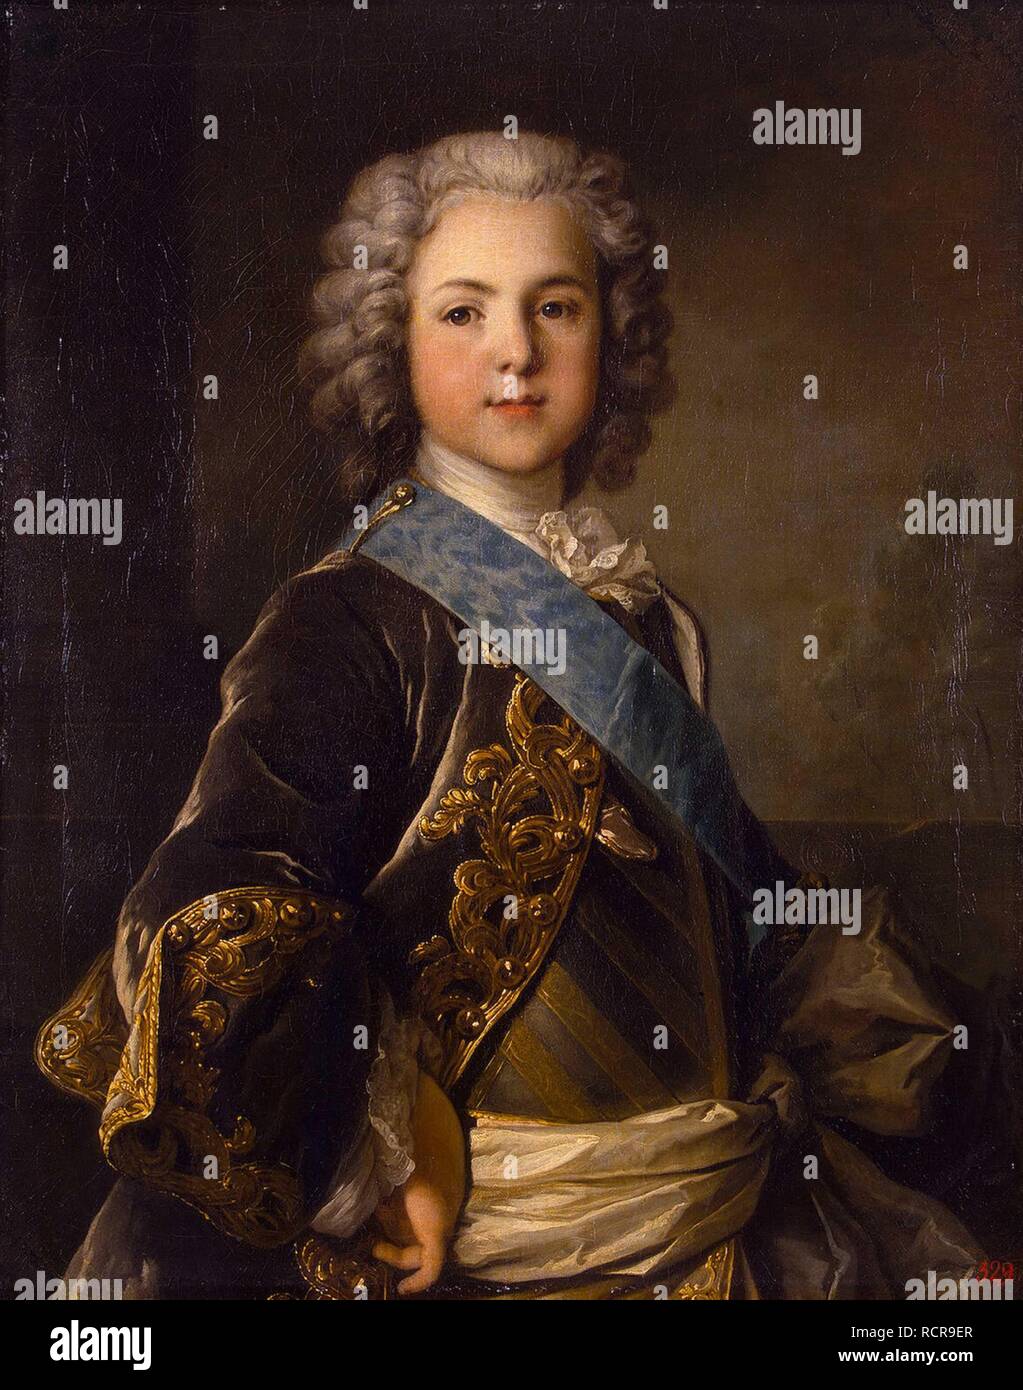 Portrait of Louis, Grand Dauphin of France. Museum: State Hermitage, St. Petersburg. Author: TOCQUE, LOUIS. Stock Photo